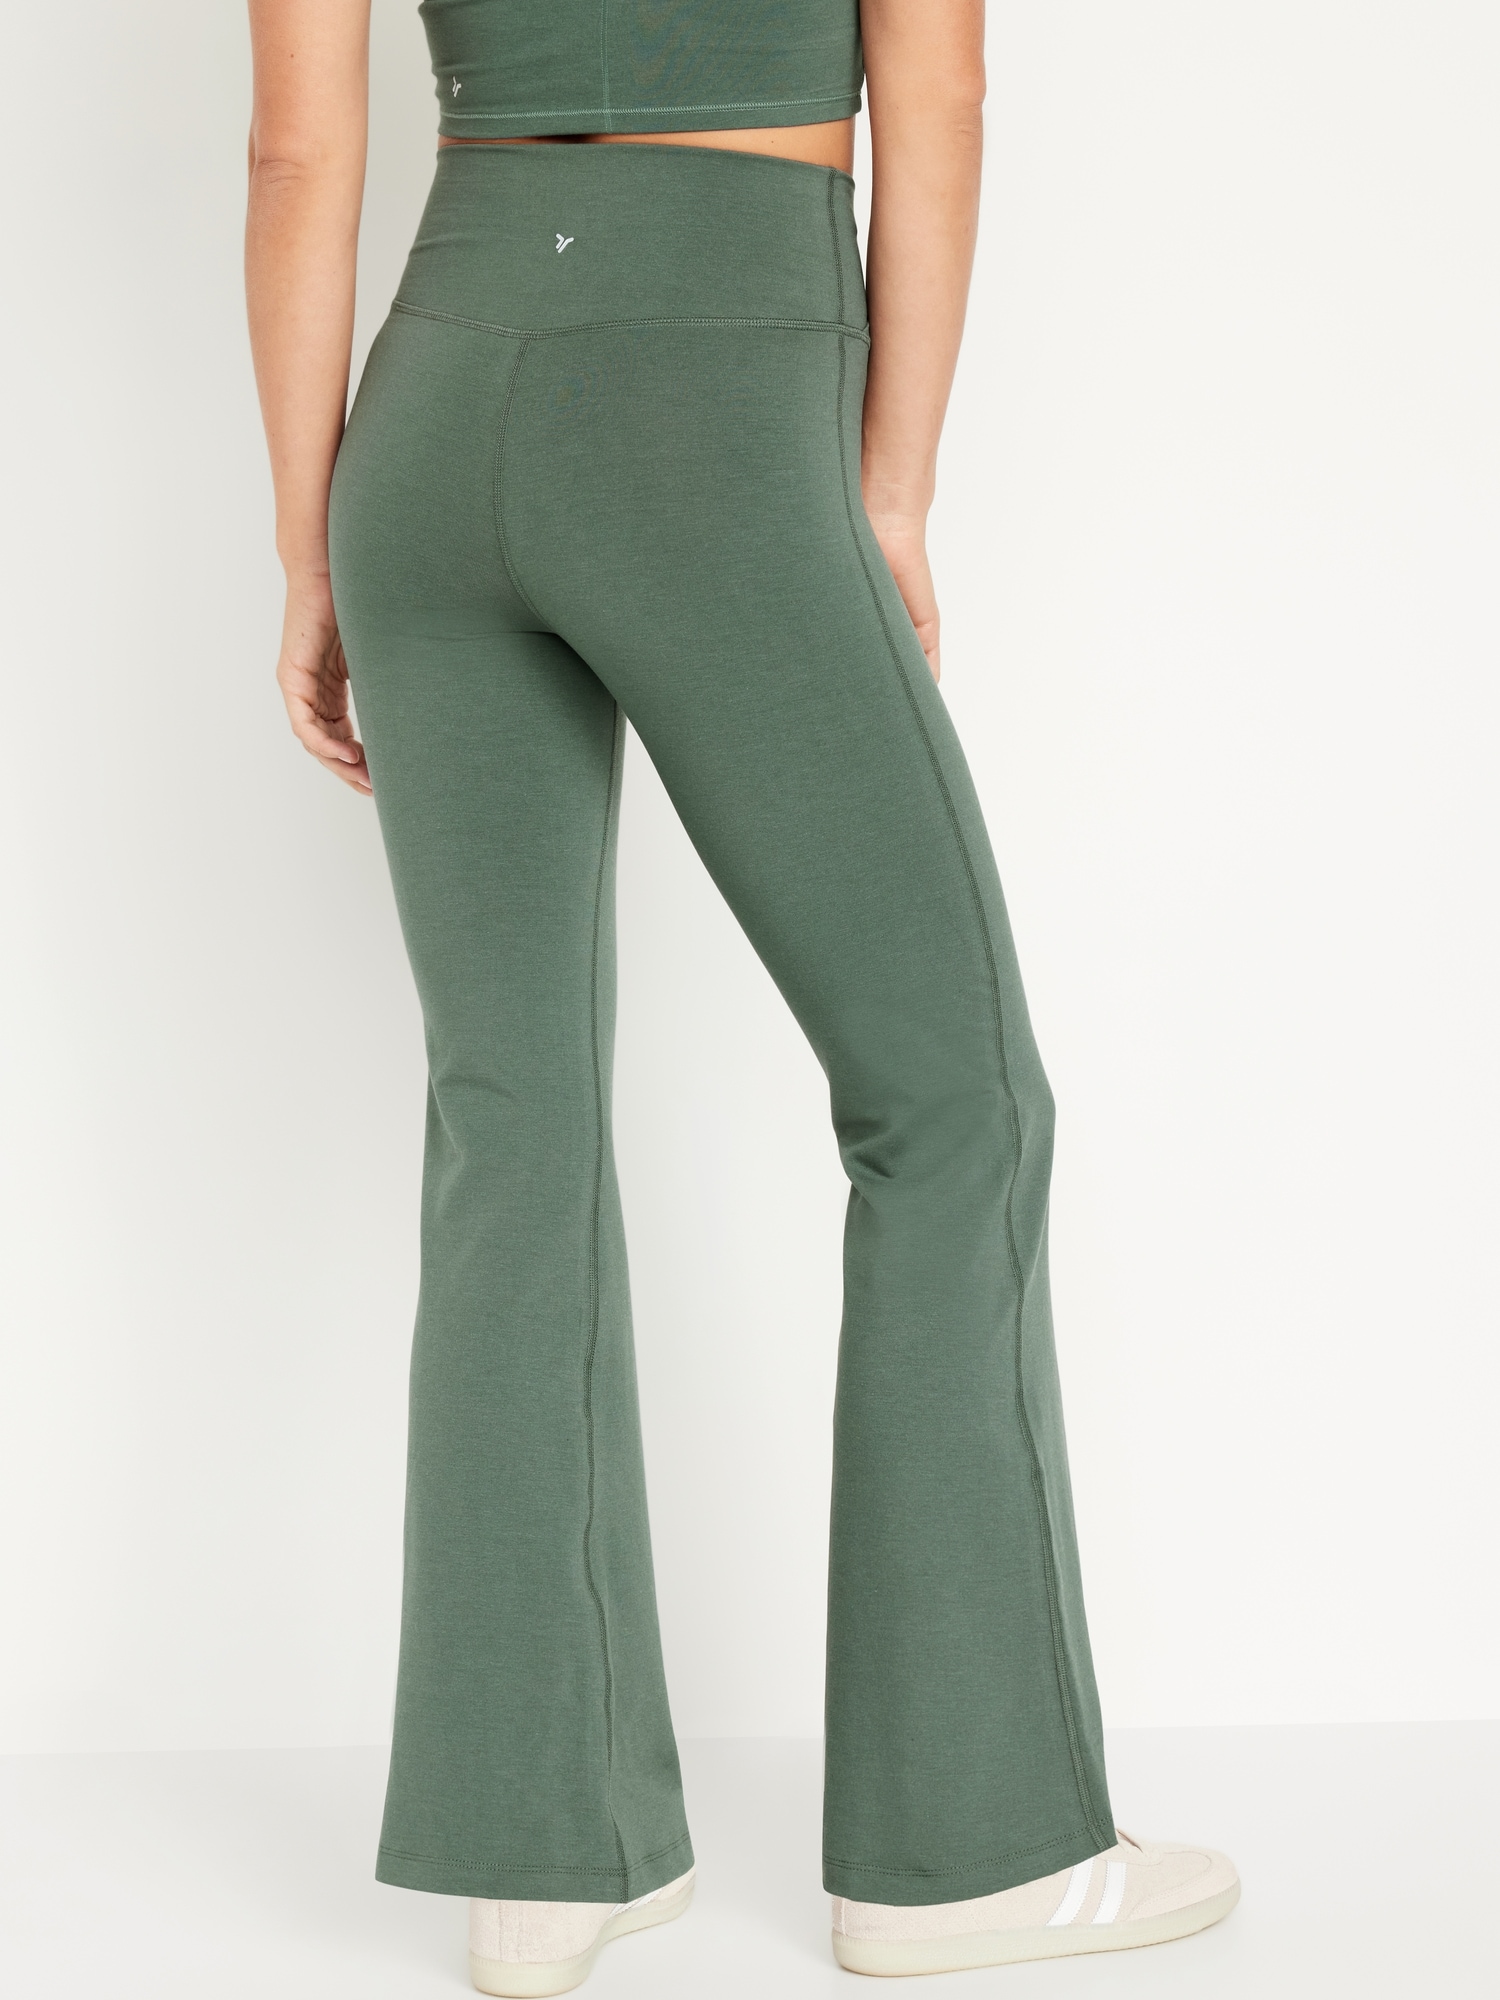 Raise Up compressive flare trousers